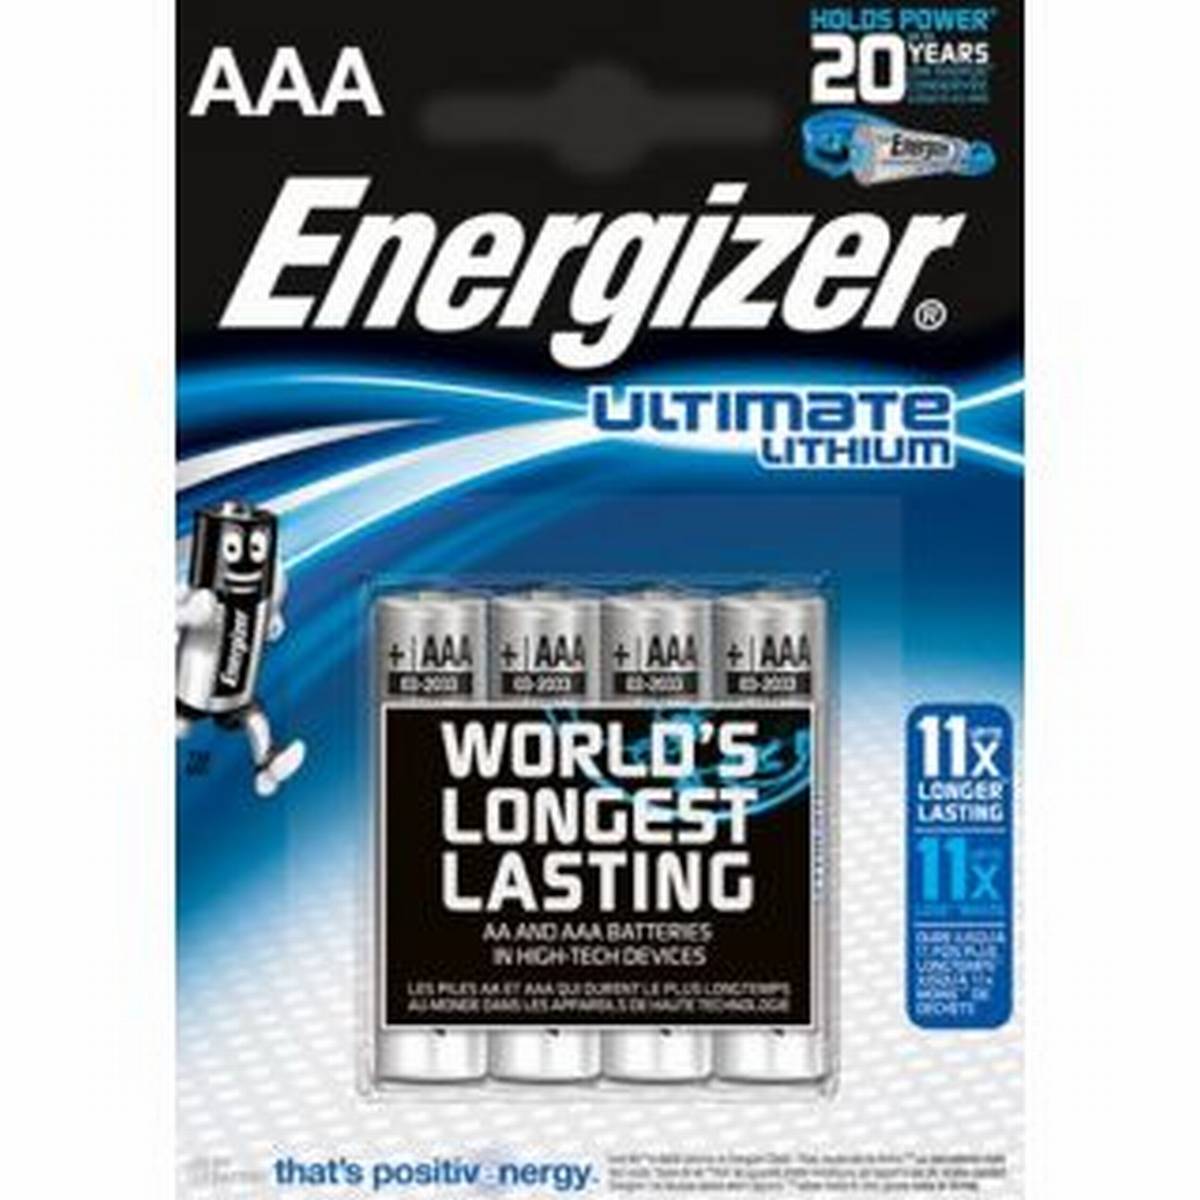 Energizer Ultimate Lithium L92 Micro AAA Battery (Blister di 4) UN3090 - SV188